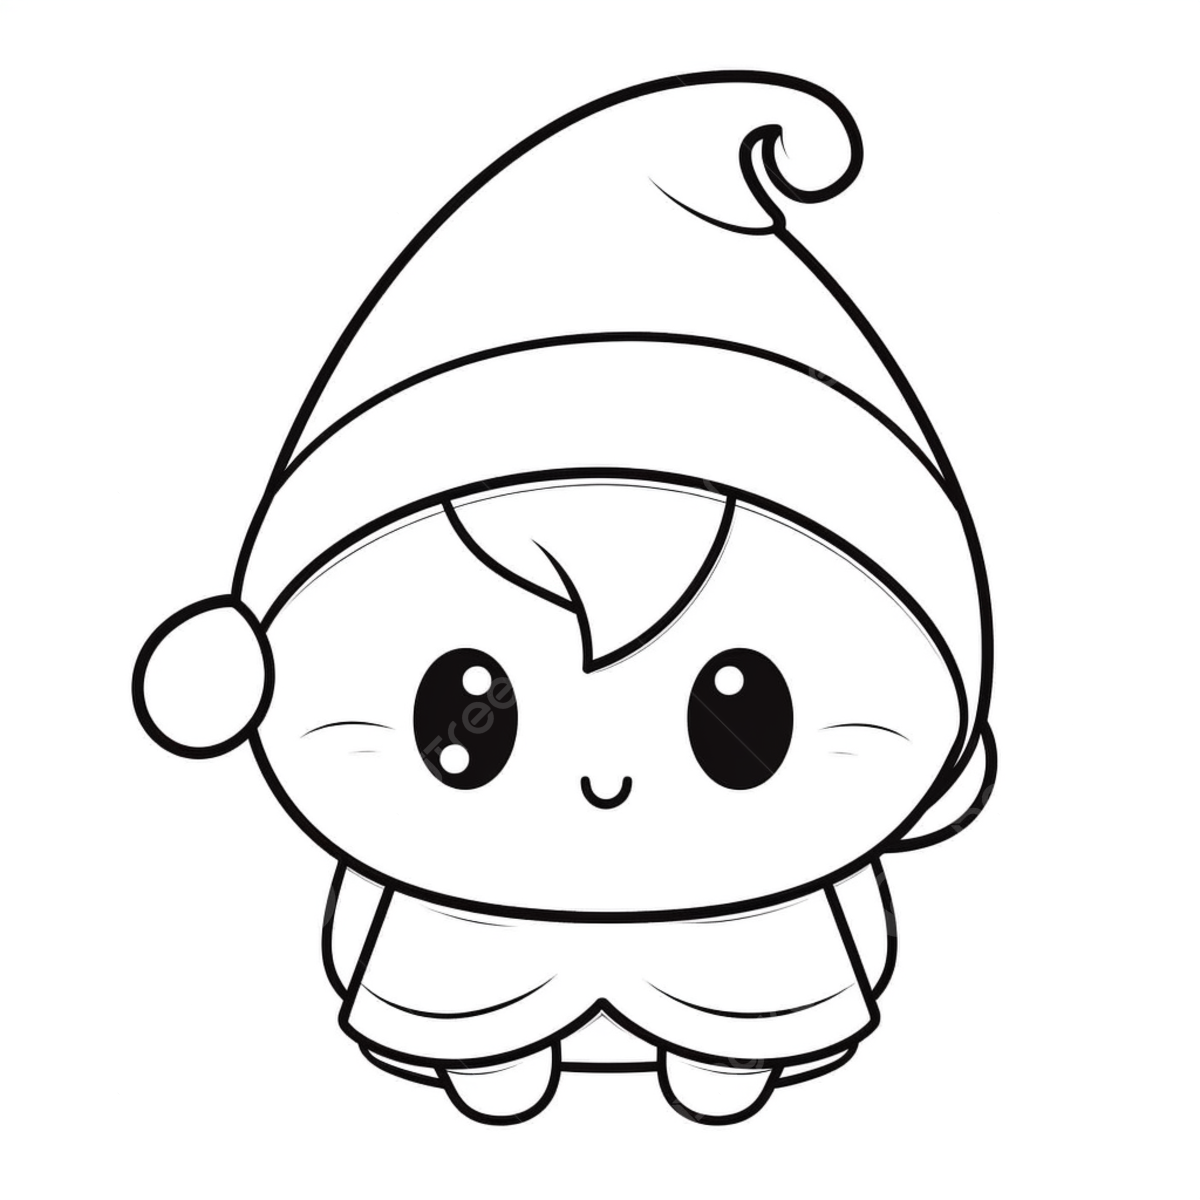 Cute christmas elf coloring page christmas drawing ring drawing elf drawing png transparent image and clipart for free download